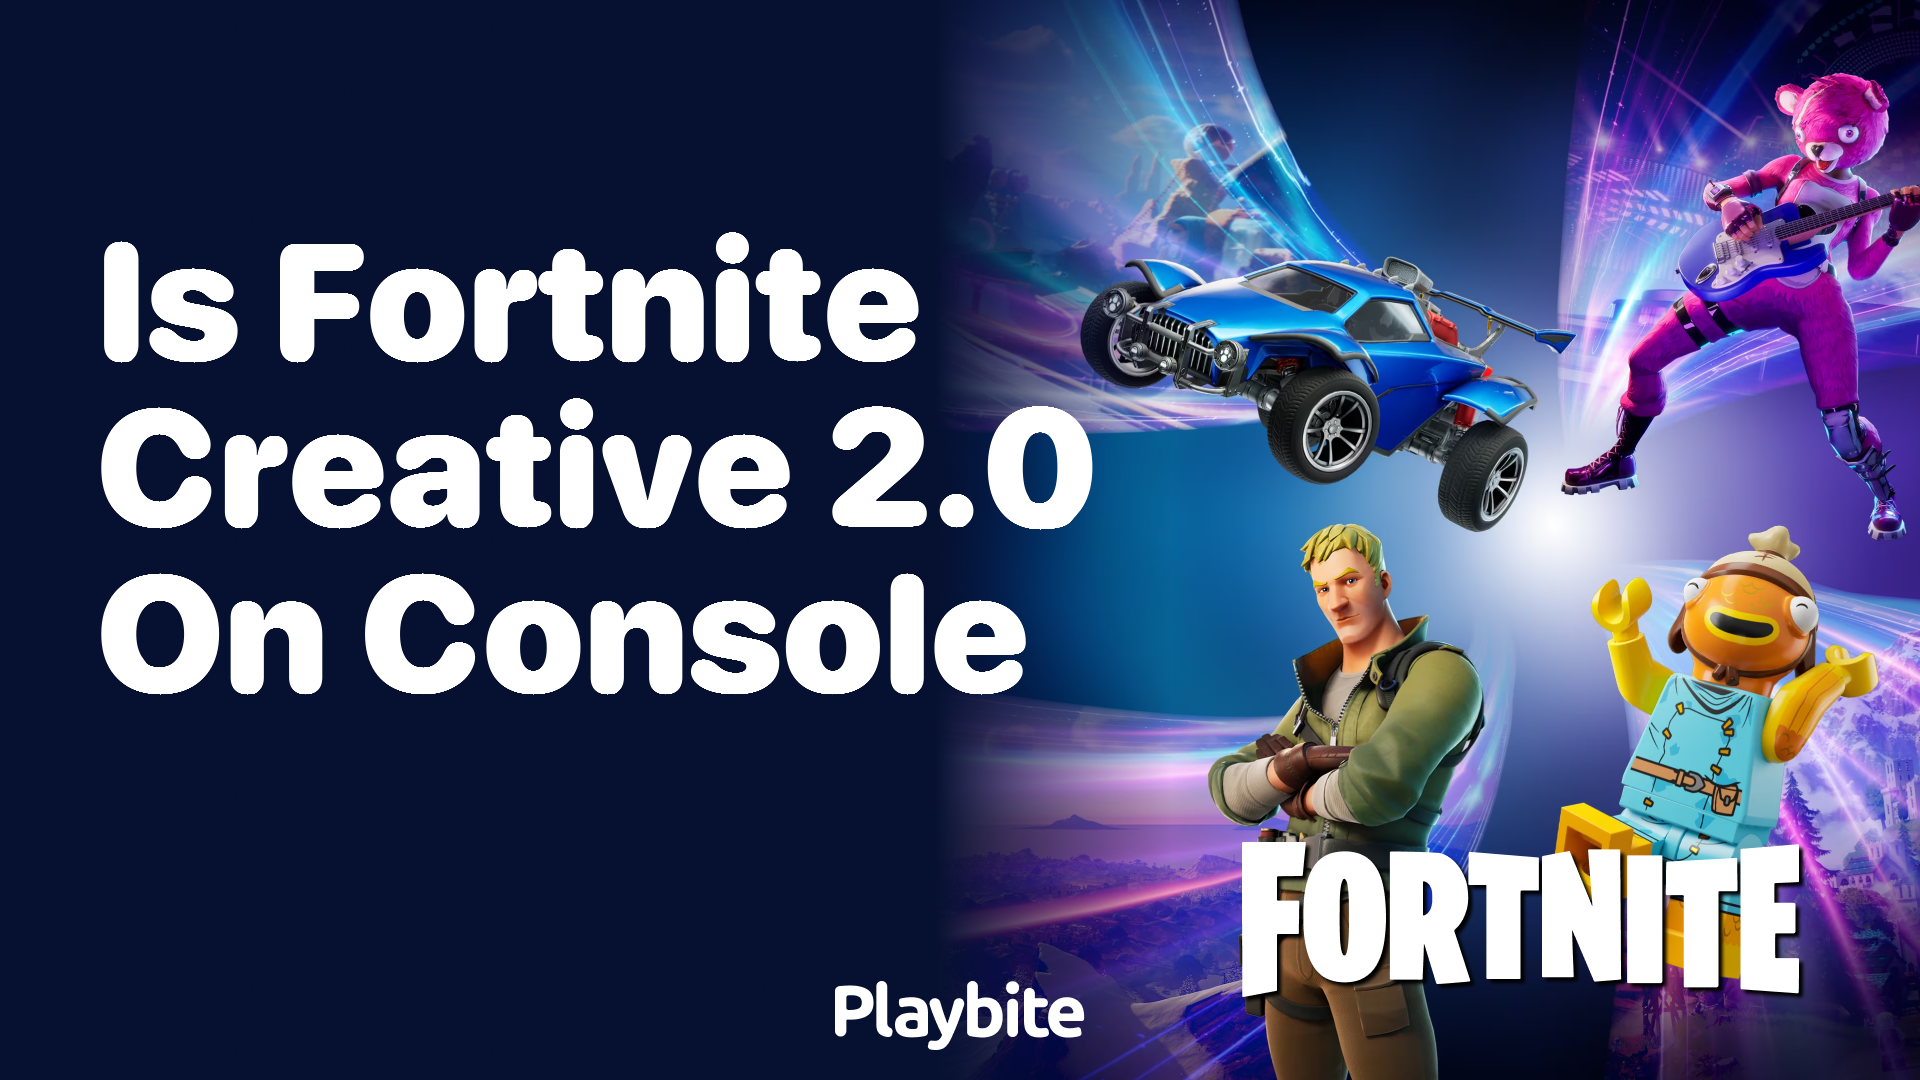 Is Fortnite Creative 2.0 Available on Console?